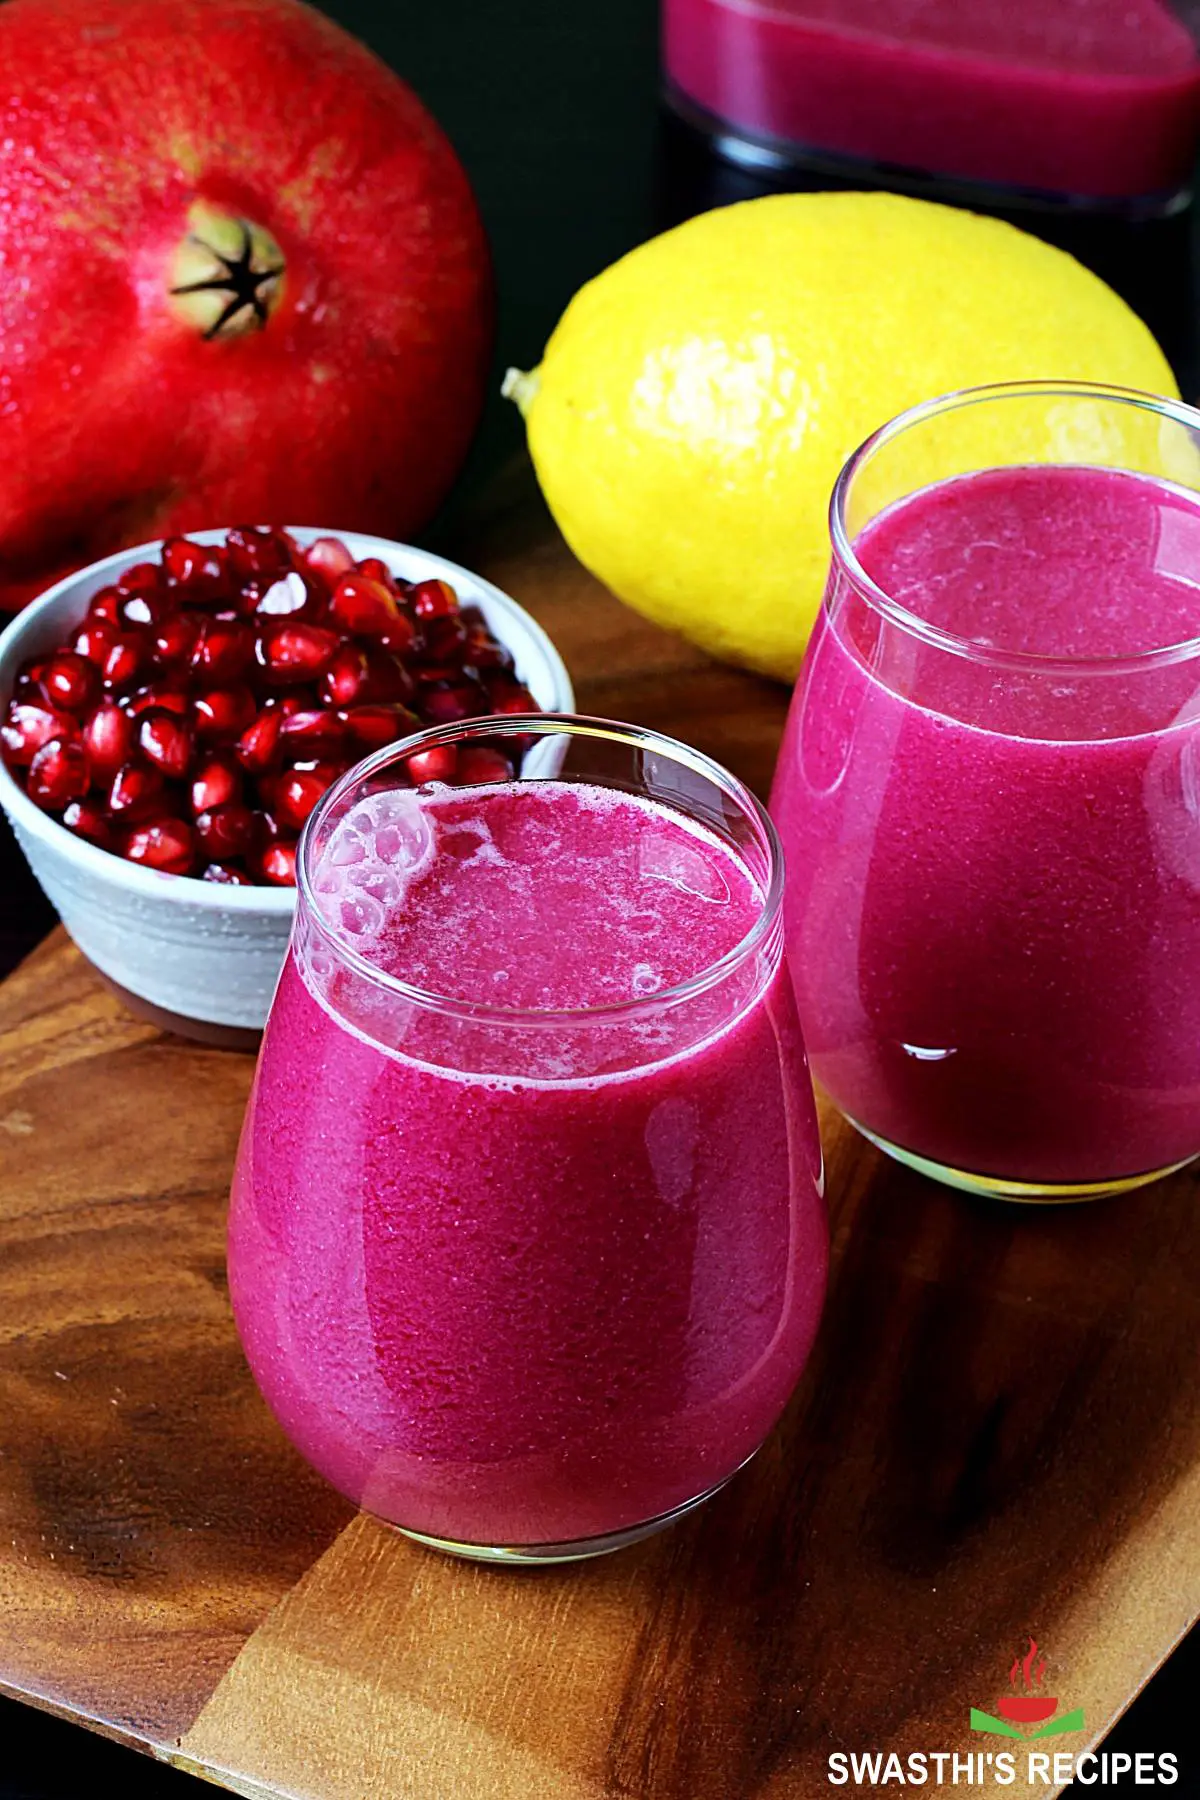 10 Healthy Beet Juice Recipes to Make at Home - Insanely Good